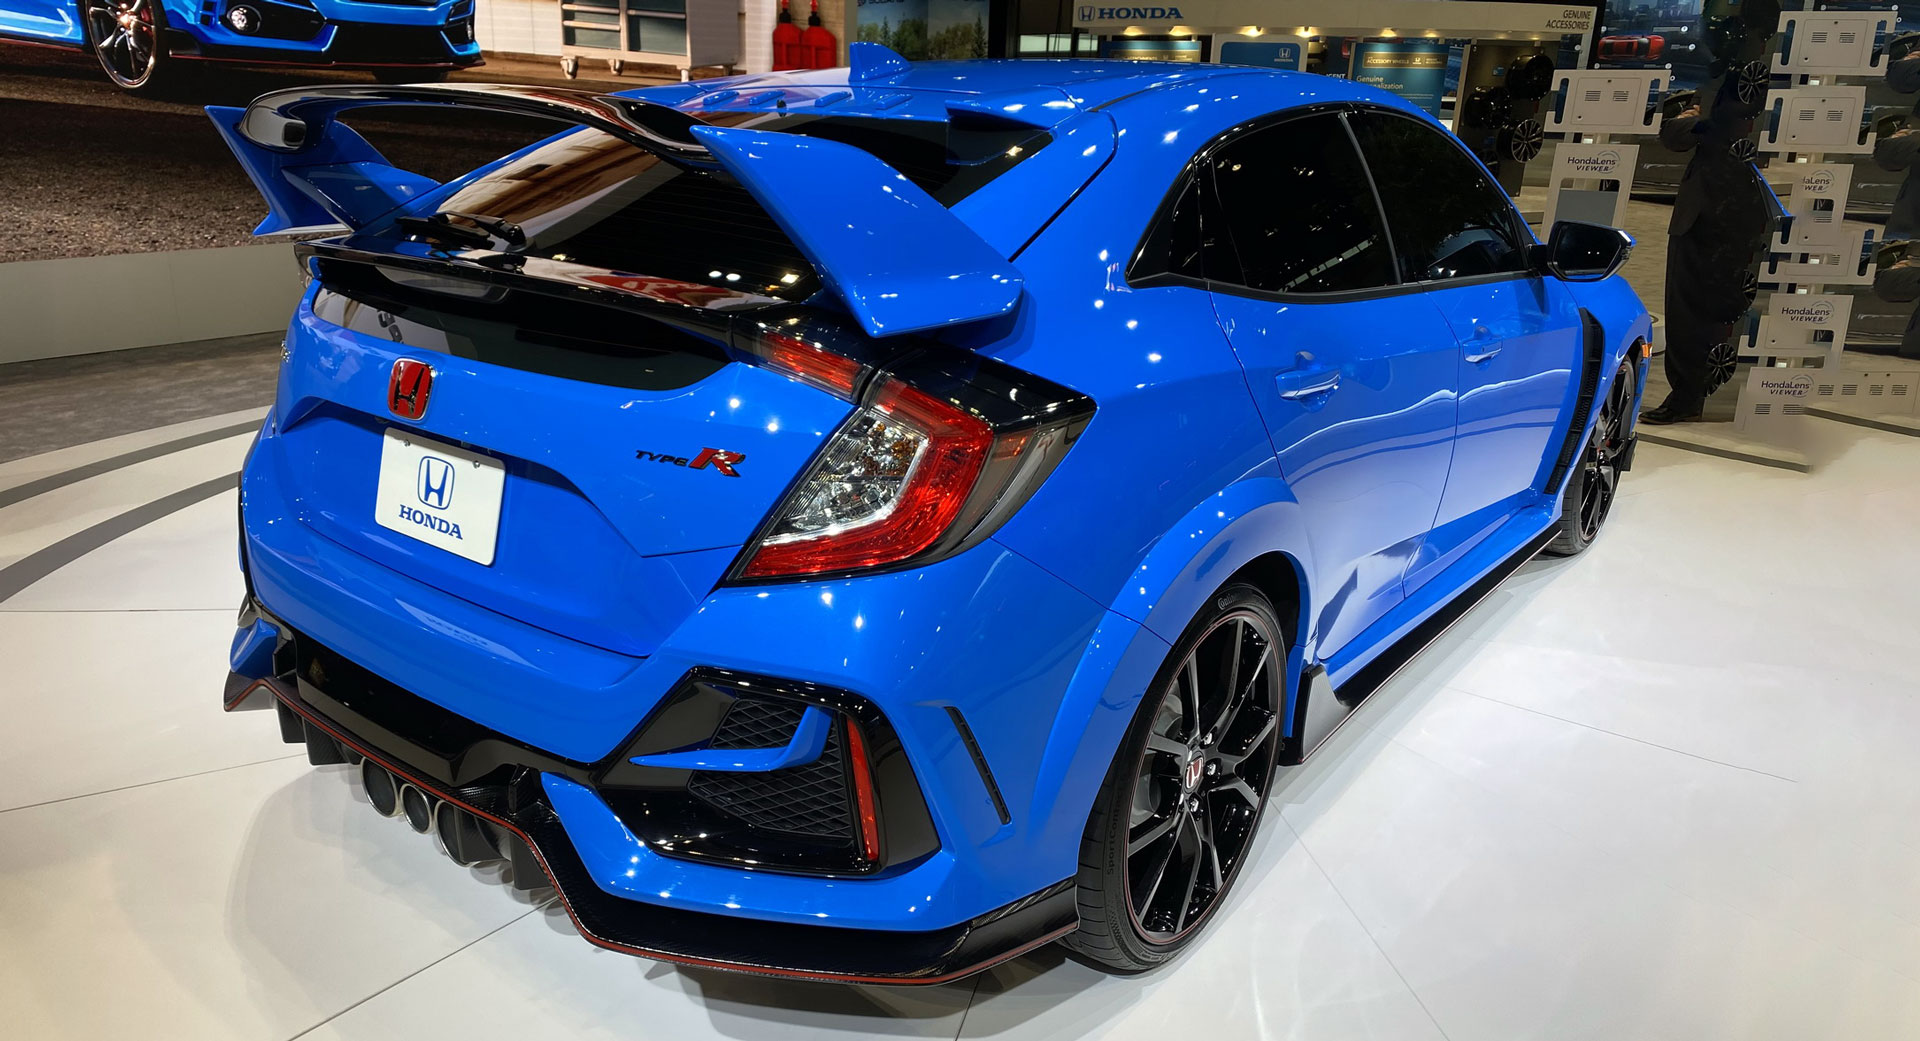 2020 Honda Civic Type R Arrives In America With Minor Styling